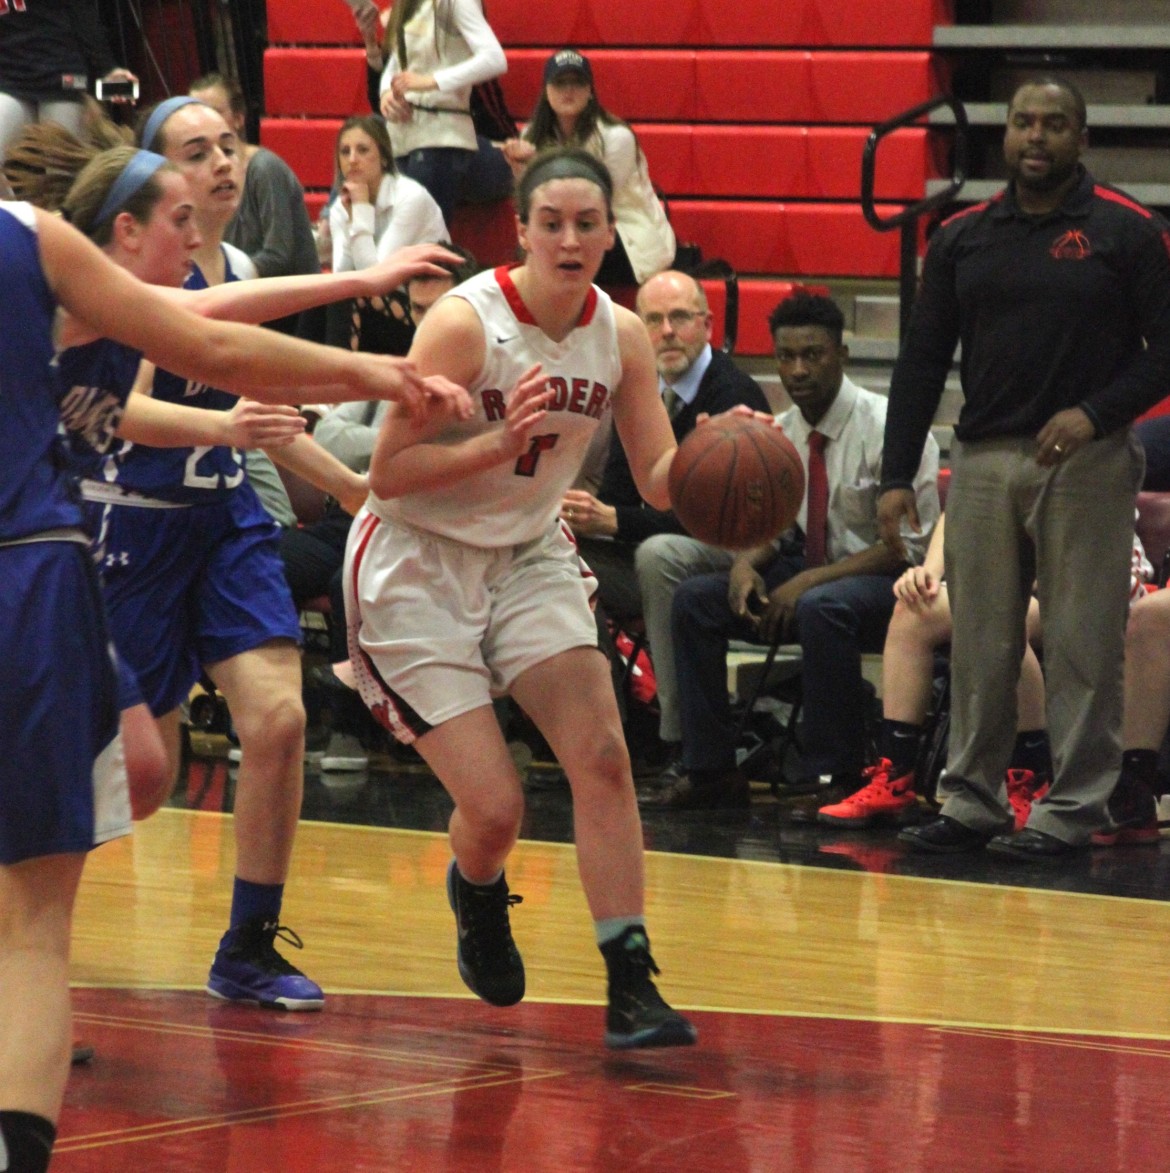 Watertown senior Felicia Korte drives to the basket against Danvers in the state tournament game. She had 16 points Friday night.